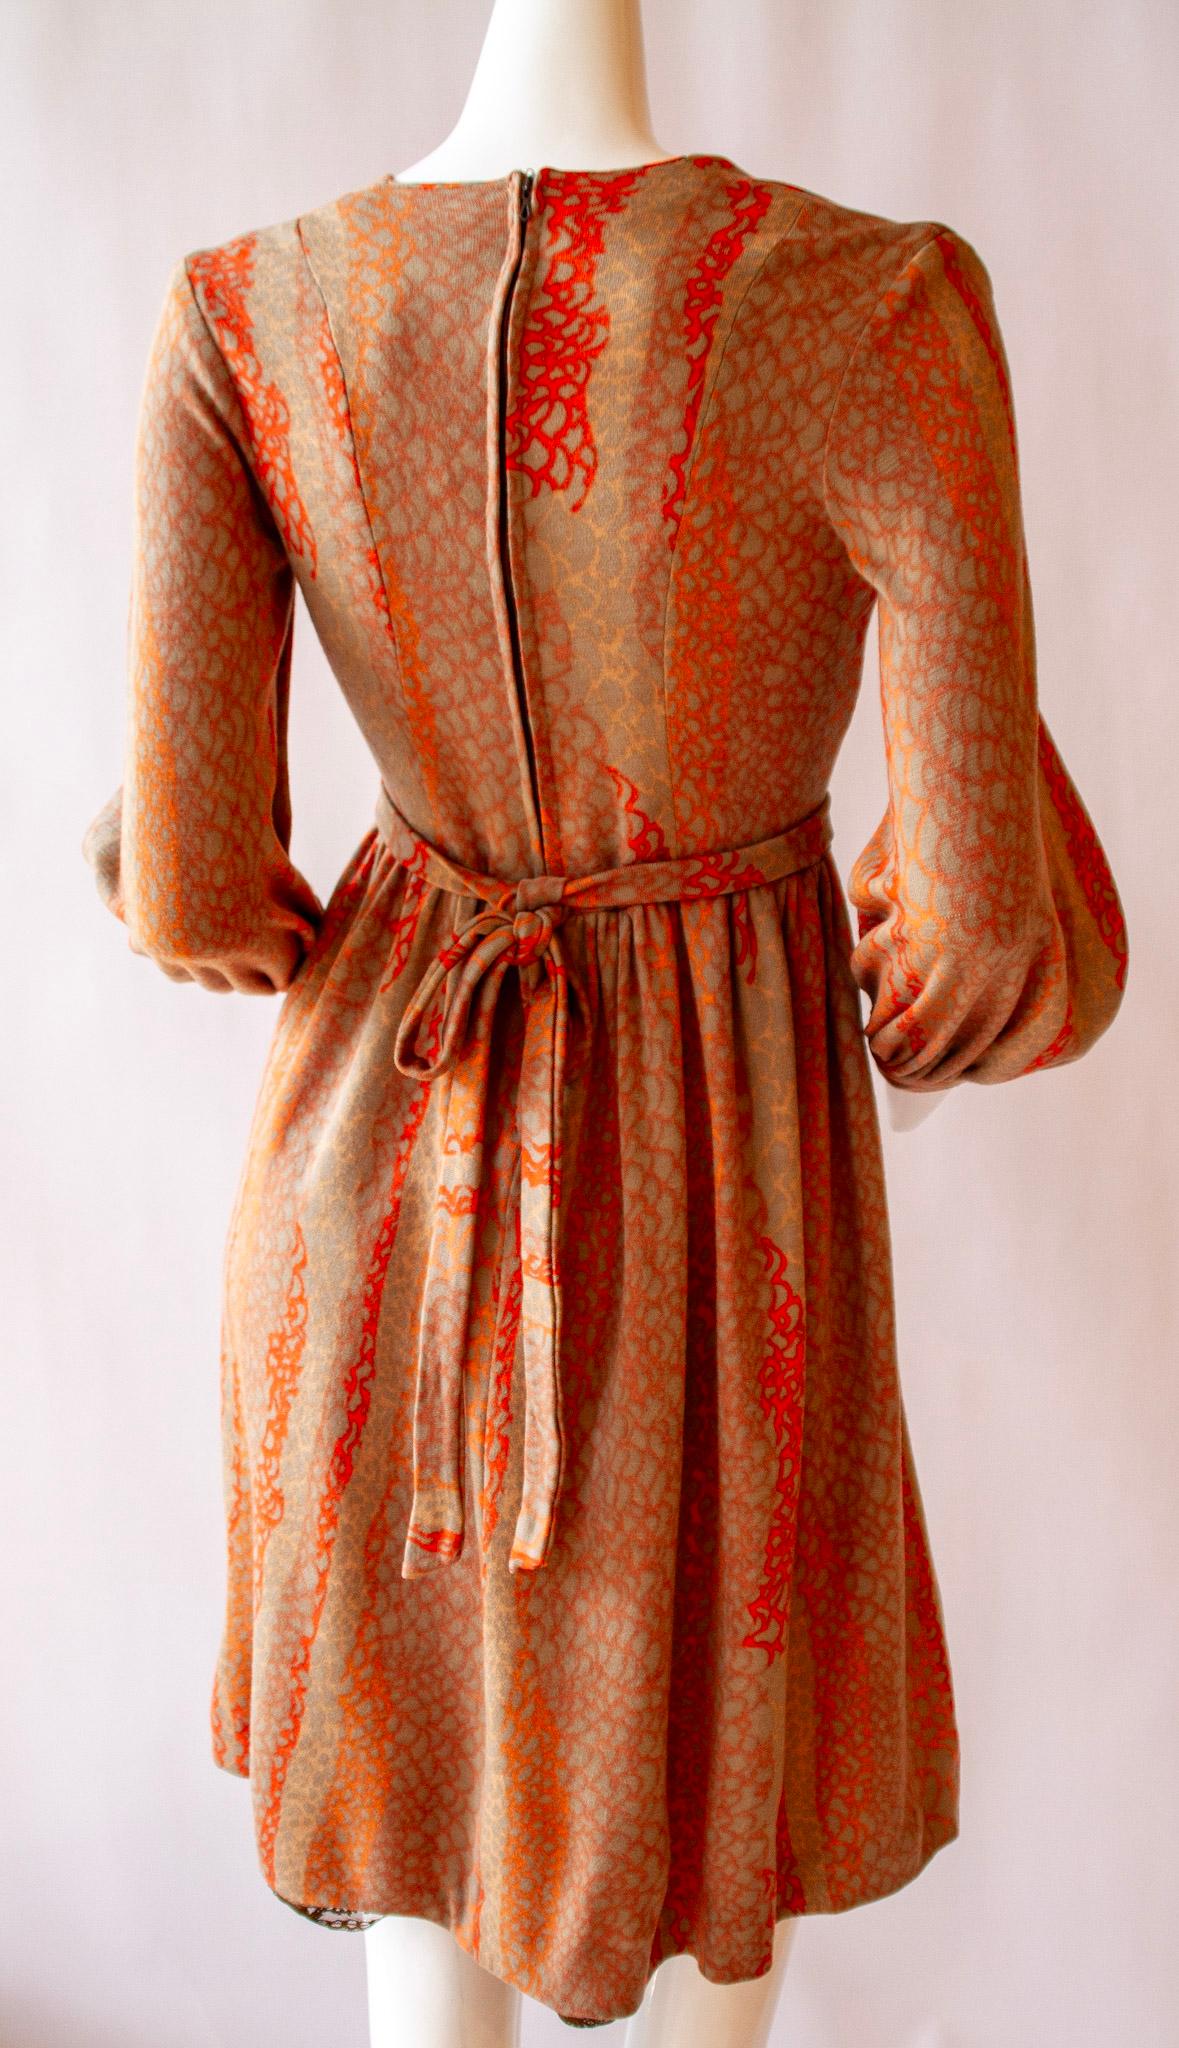 BOB MACKIE Bishop Sleeves Wrap Dress with Zipper Back, Creamsicle Orange, c.1970 In Excellent Condition For Sale In Kingston, NY